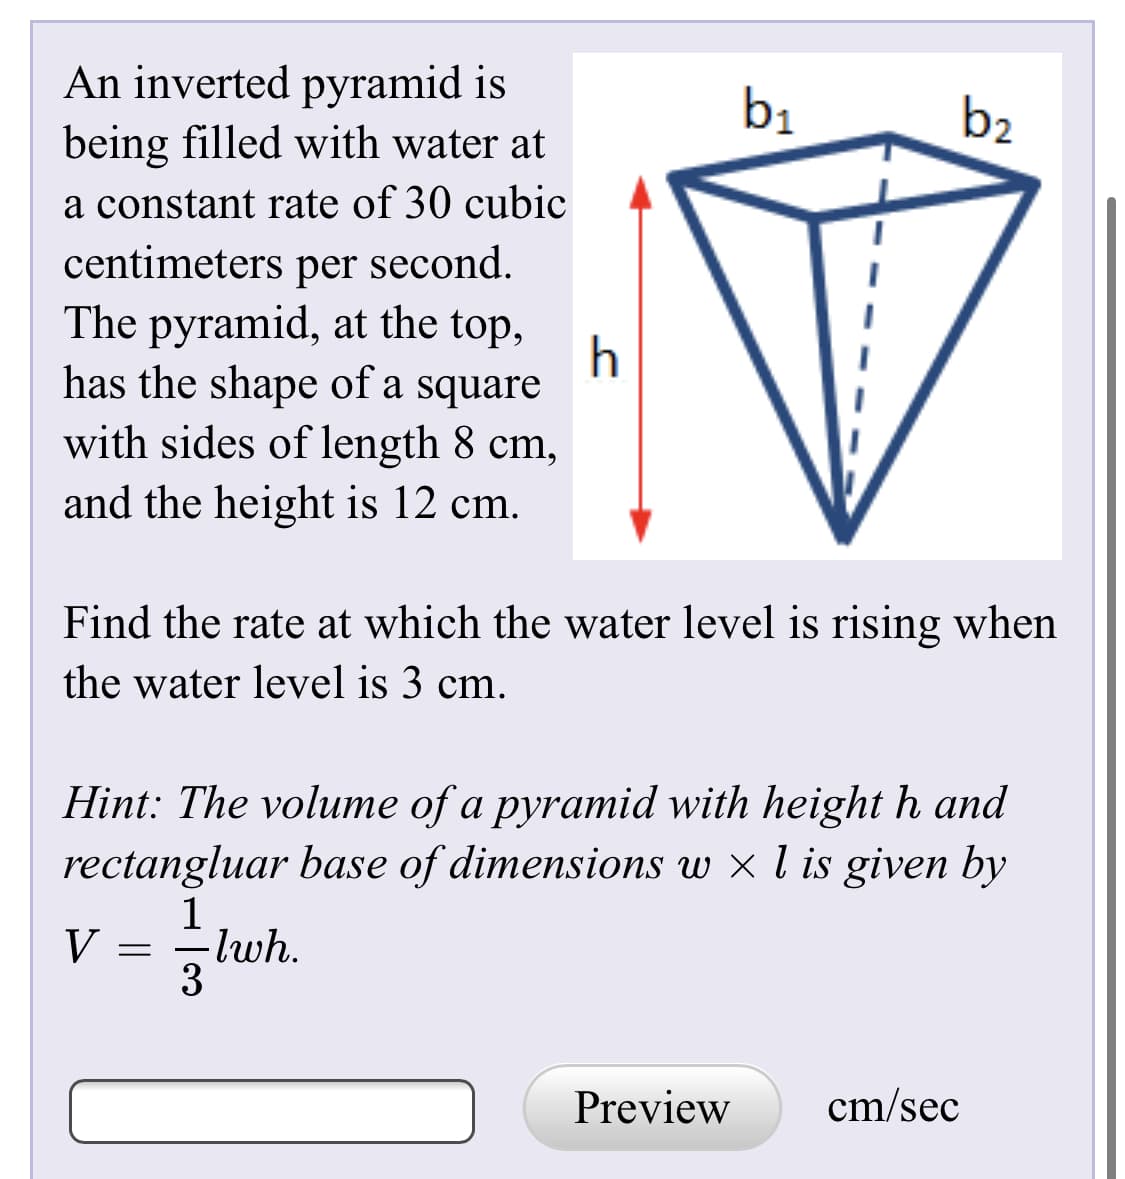 An inverted pyramid is
being filled with water at
b1
b2
a constant rate of 30 cubic
centimeters per second.
The pyramid, at the top,
has the shape of a square
with sides of length 8 cm,
and the height is 12 cm.
Find the rate at which the water level is rising when
the water level is 3 cm.
Hint: The volume of a pyramid with height h and
rectangluar base of dimensions w × l is given by
lwh.
3
Preview
cm/sec
